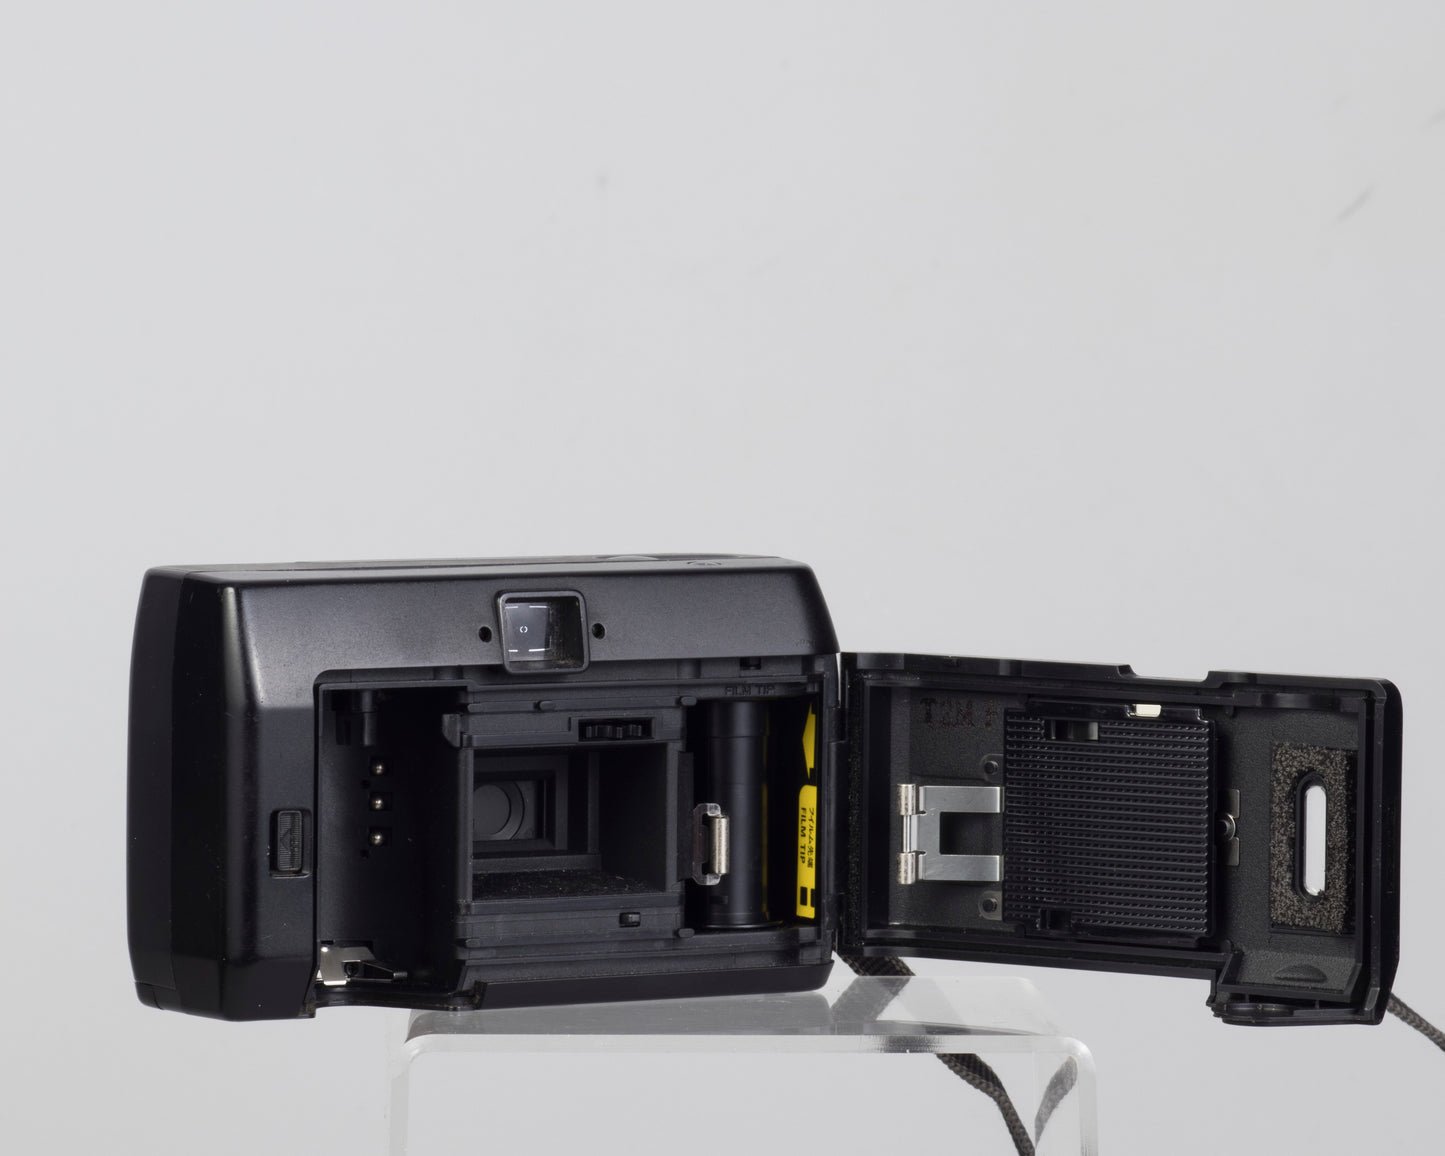 The Konica MT-100 is a 35mm point-and-shoot camera from 1989 (film door open)